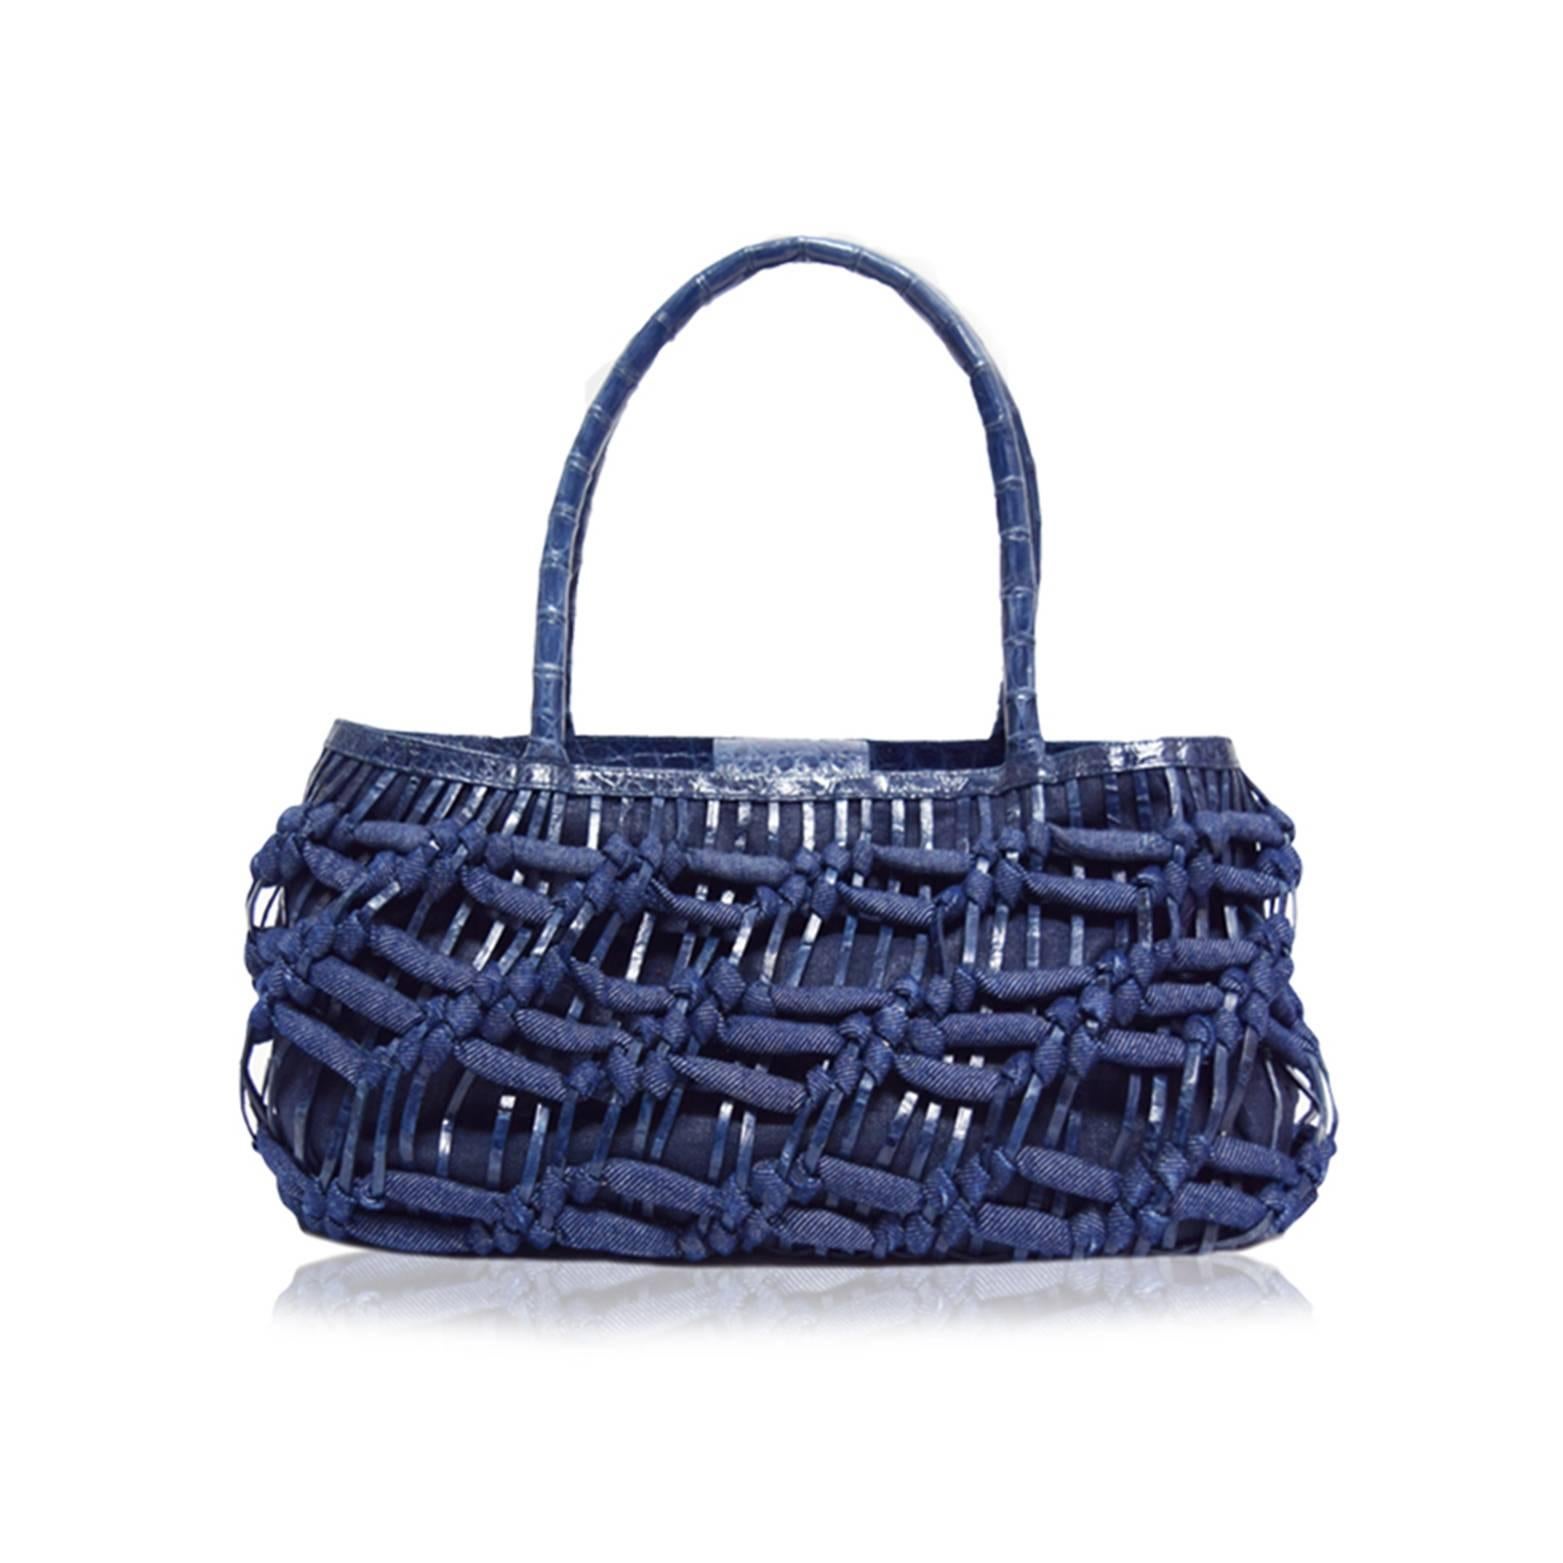 Denim and leather woven fabrication
Navy blue suede lining
Basket style
Crocodile leather handles 
Magnetic snap closure 
Interior zipped pocket
7.5